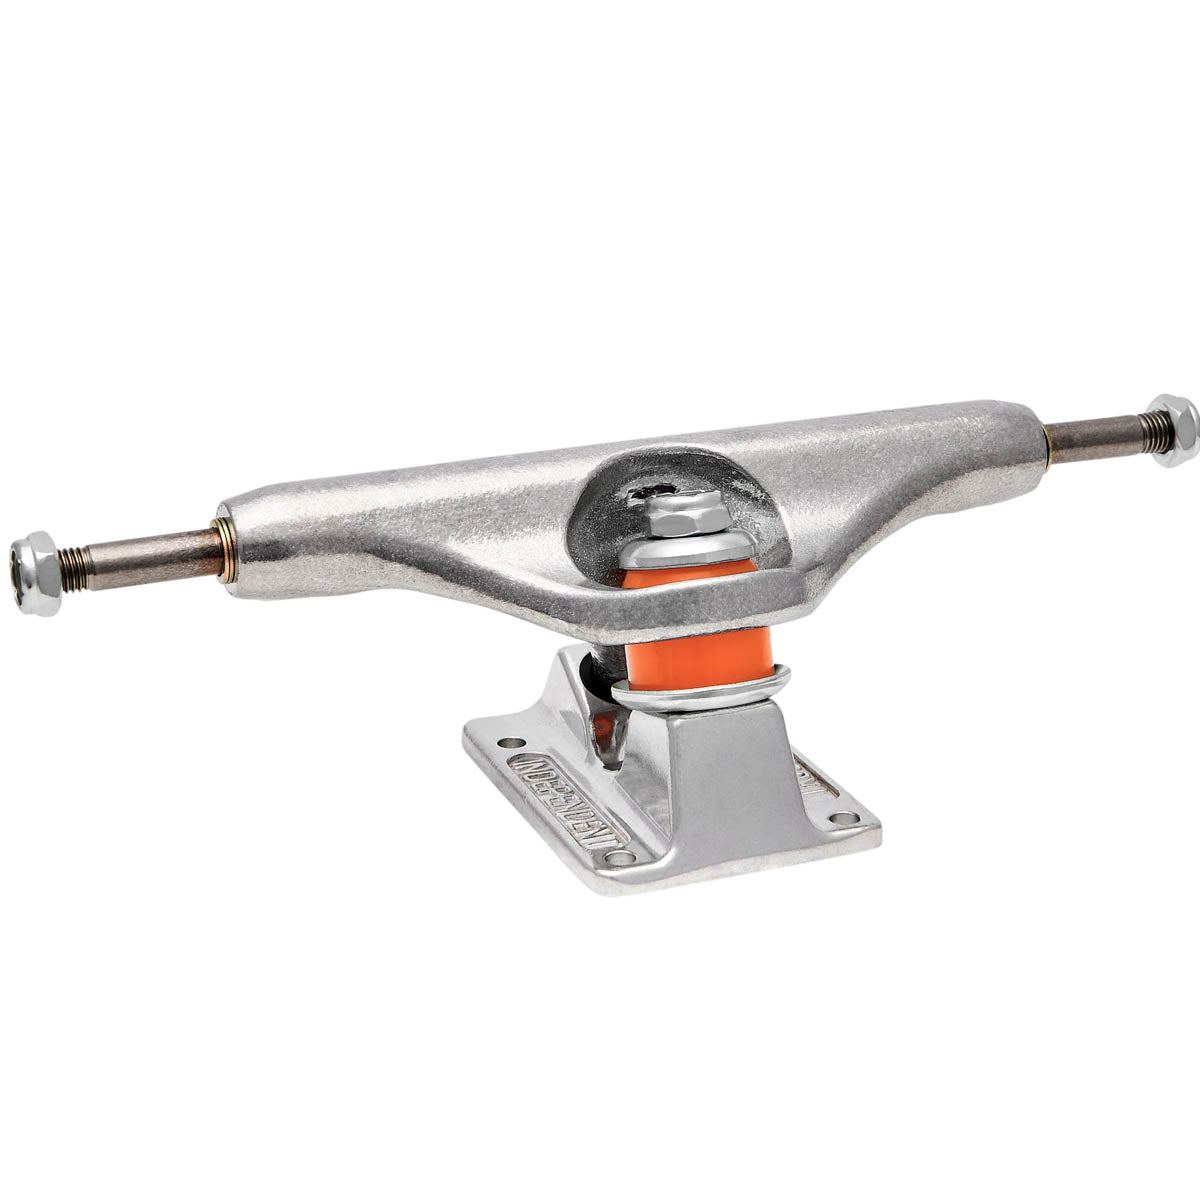 Independent Stage 11 Forged Titanium Skateboard Trucks - Silver image 2